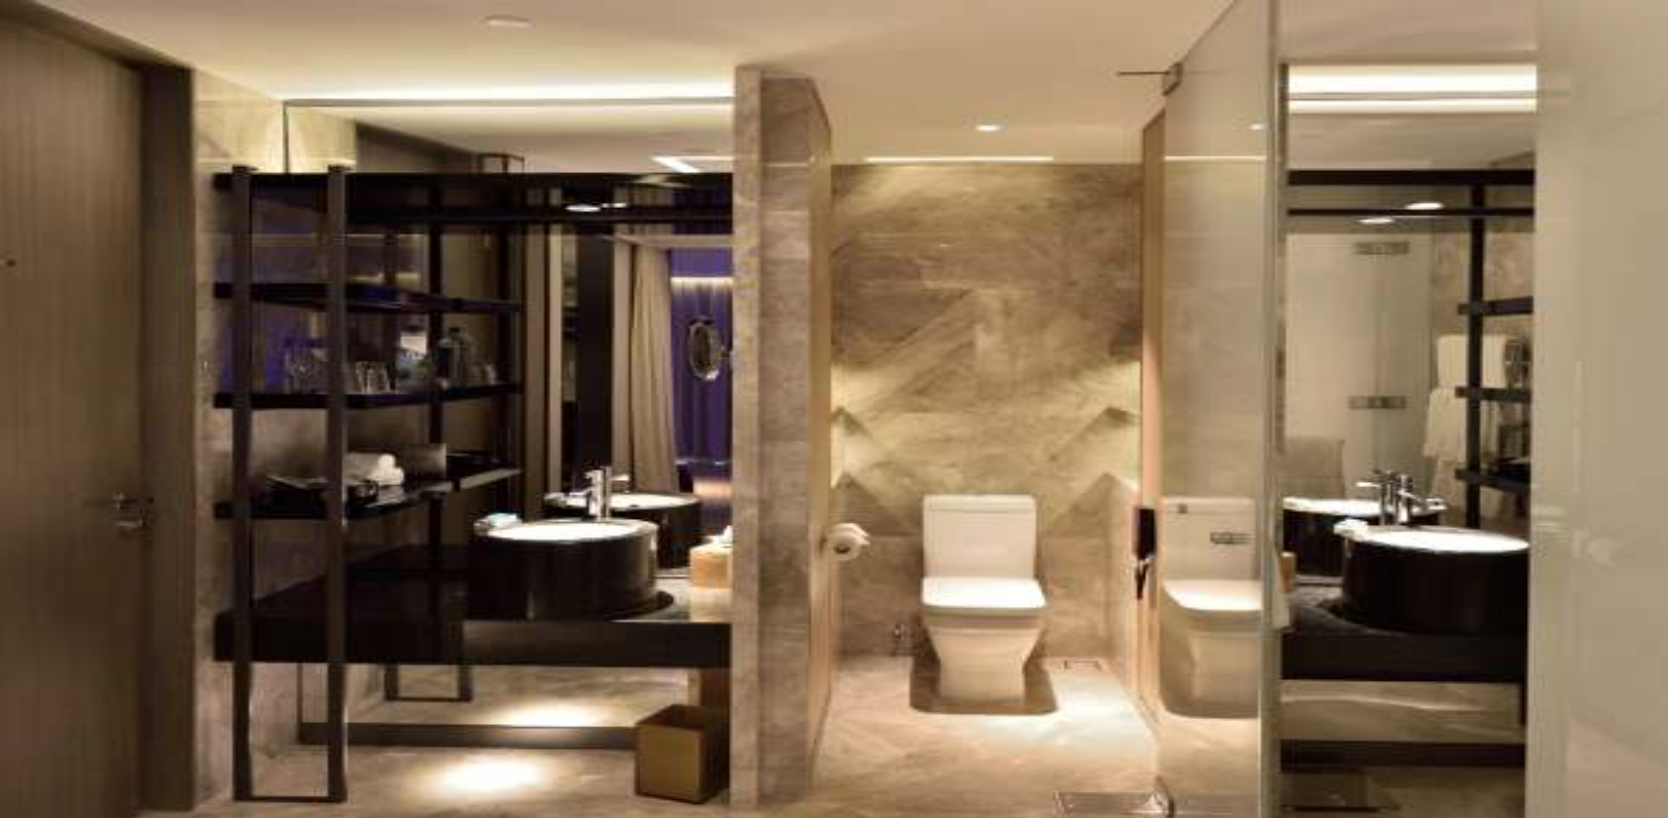 The Ultimate Lesson In Beautiful Bathroom Design Architizer Journal